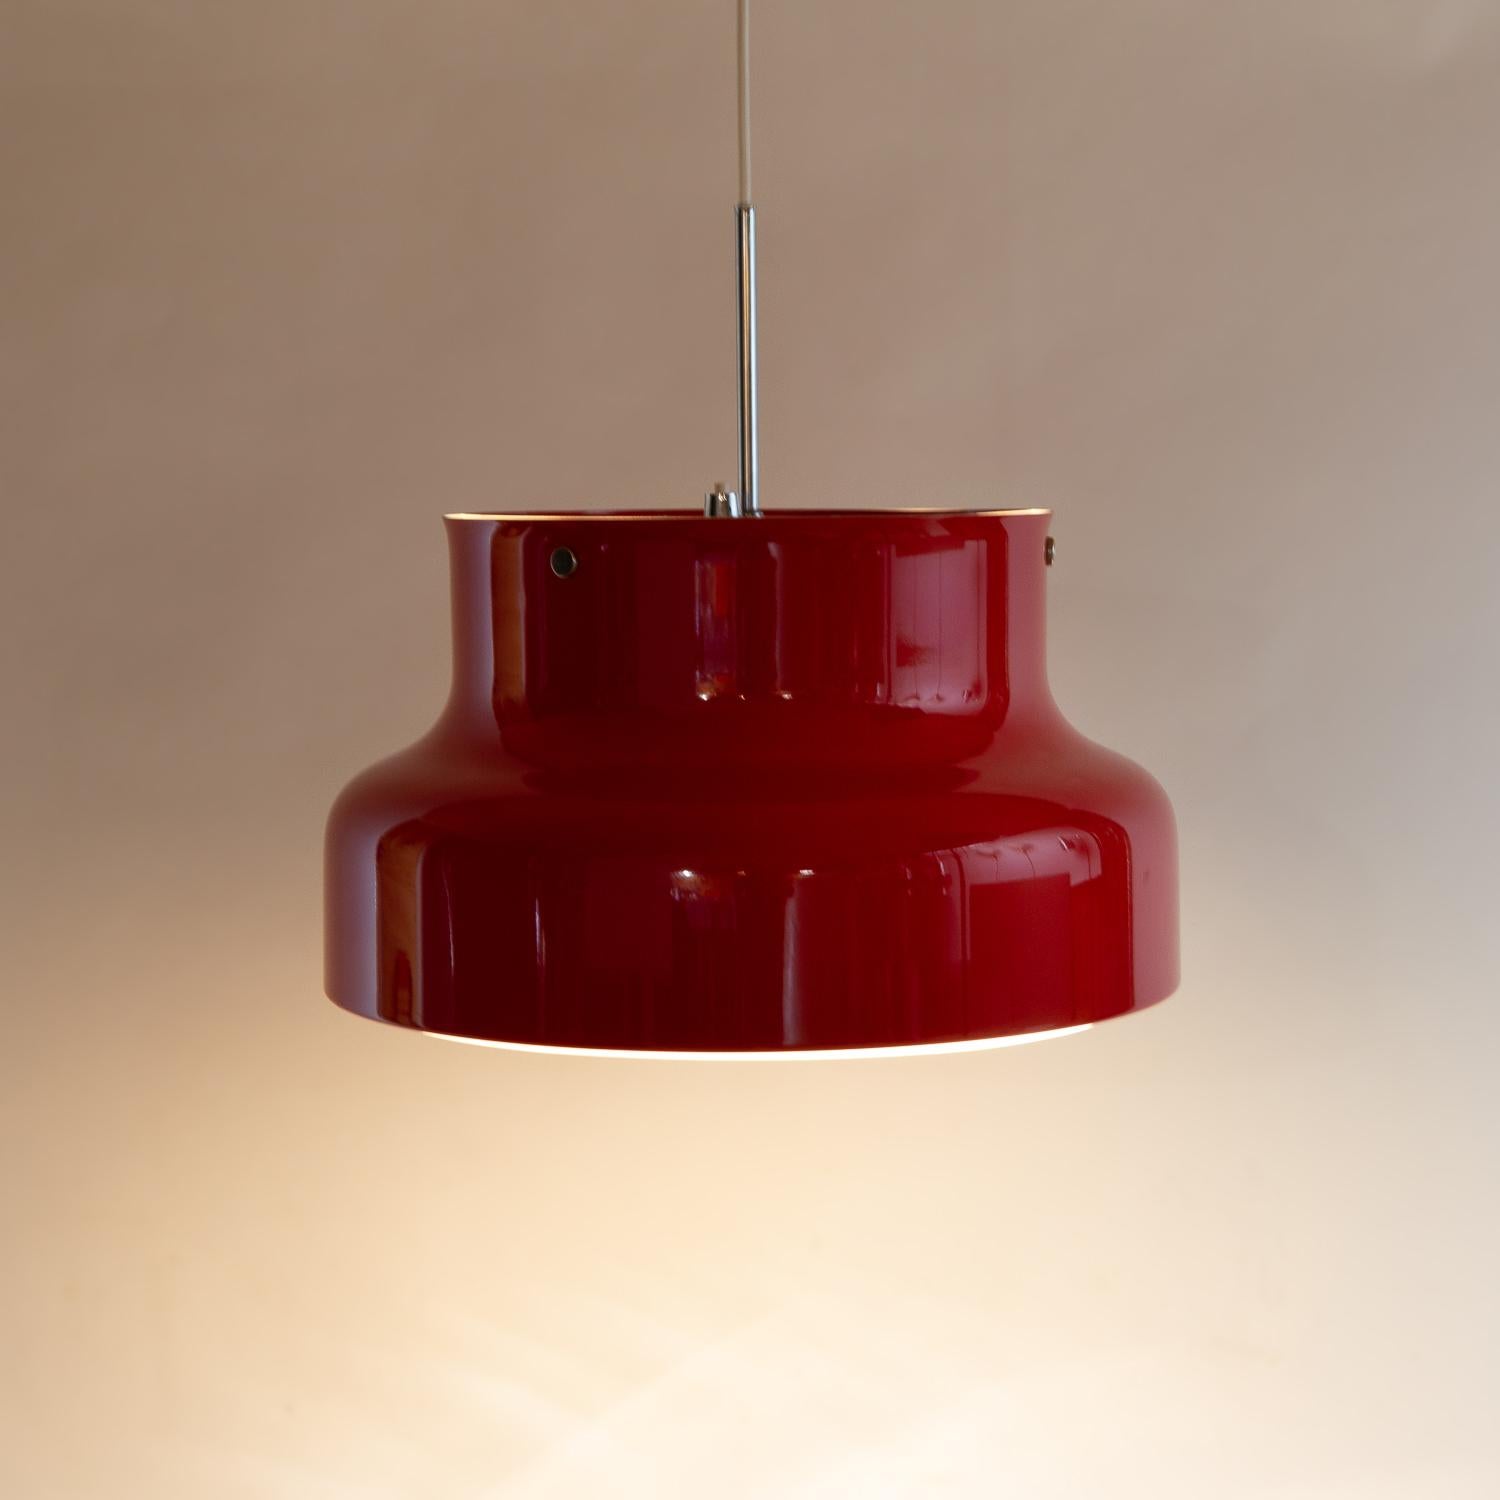 Red midcentury Bumling pendant light by Anders Pehrson for Ateljé Lyktan, Sweden, 1960s. Lacquered metal and acrylic light diffuser. This version has the double E27 lightbulb sockets which can be used individually or together for different lighting